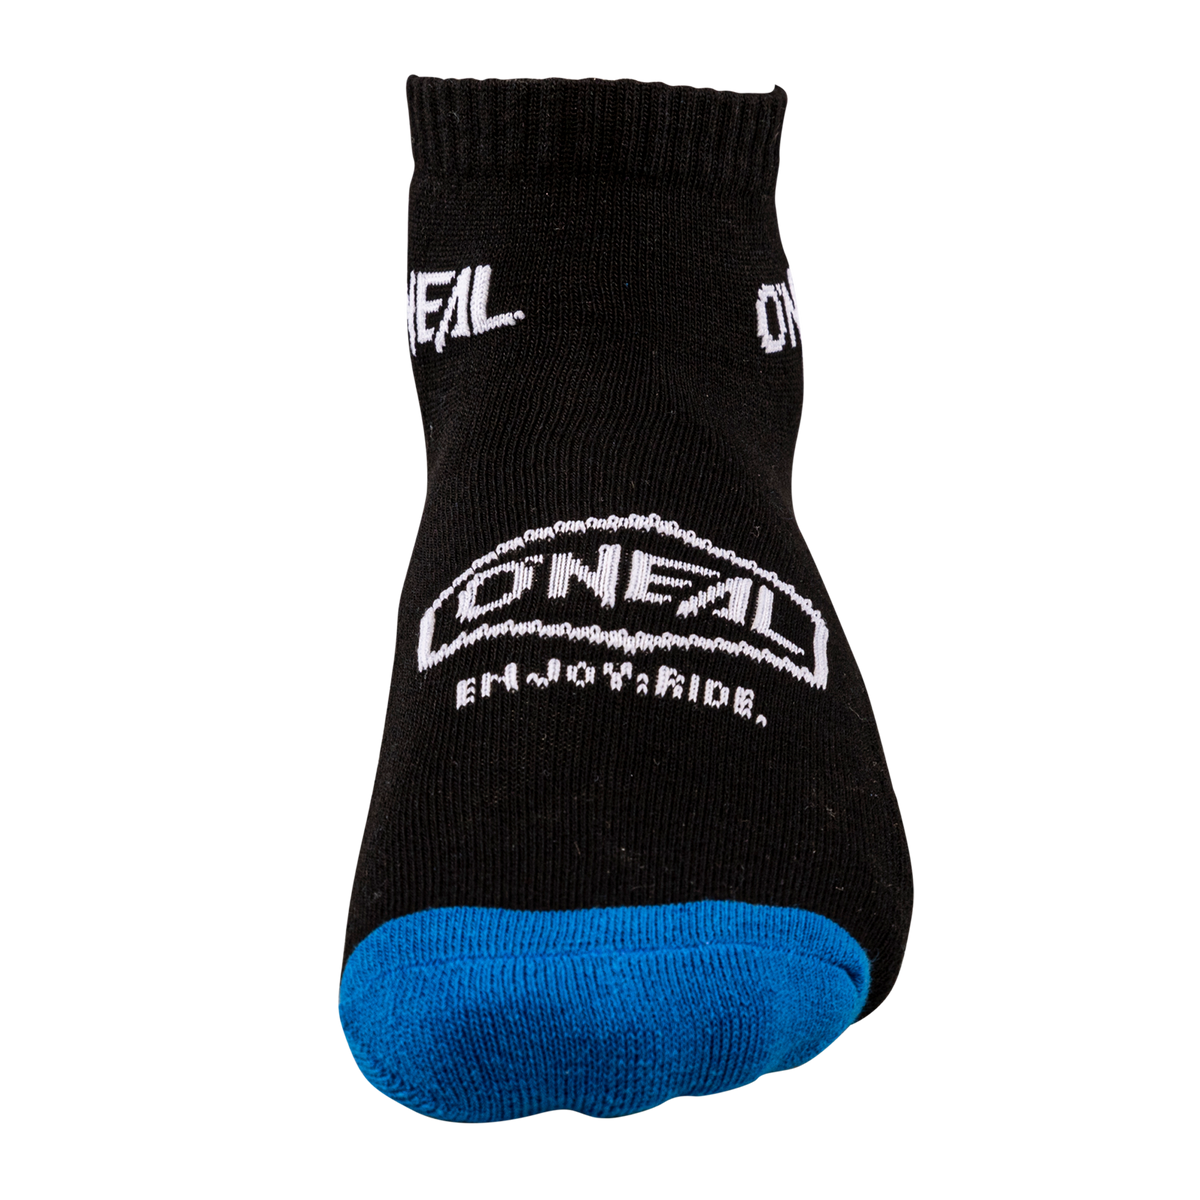 https://cdn.oneal.eu/assets/importedProductImages/ACCESSORIES/CREW%20SOCKS/ICON/black/2019_ONeal_CREW%20SOCK_ICON_black_front.png